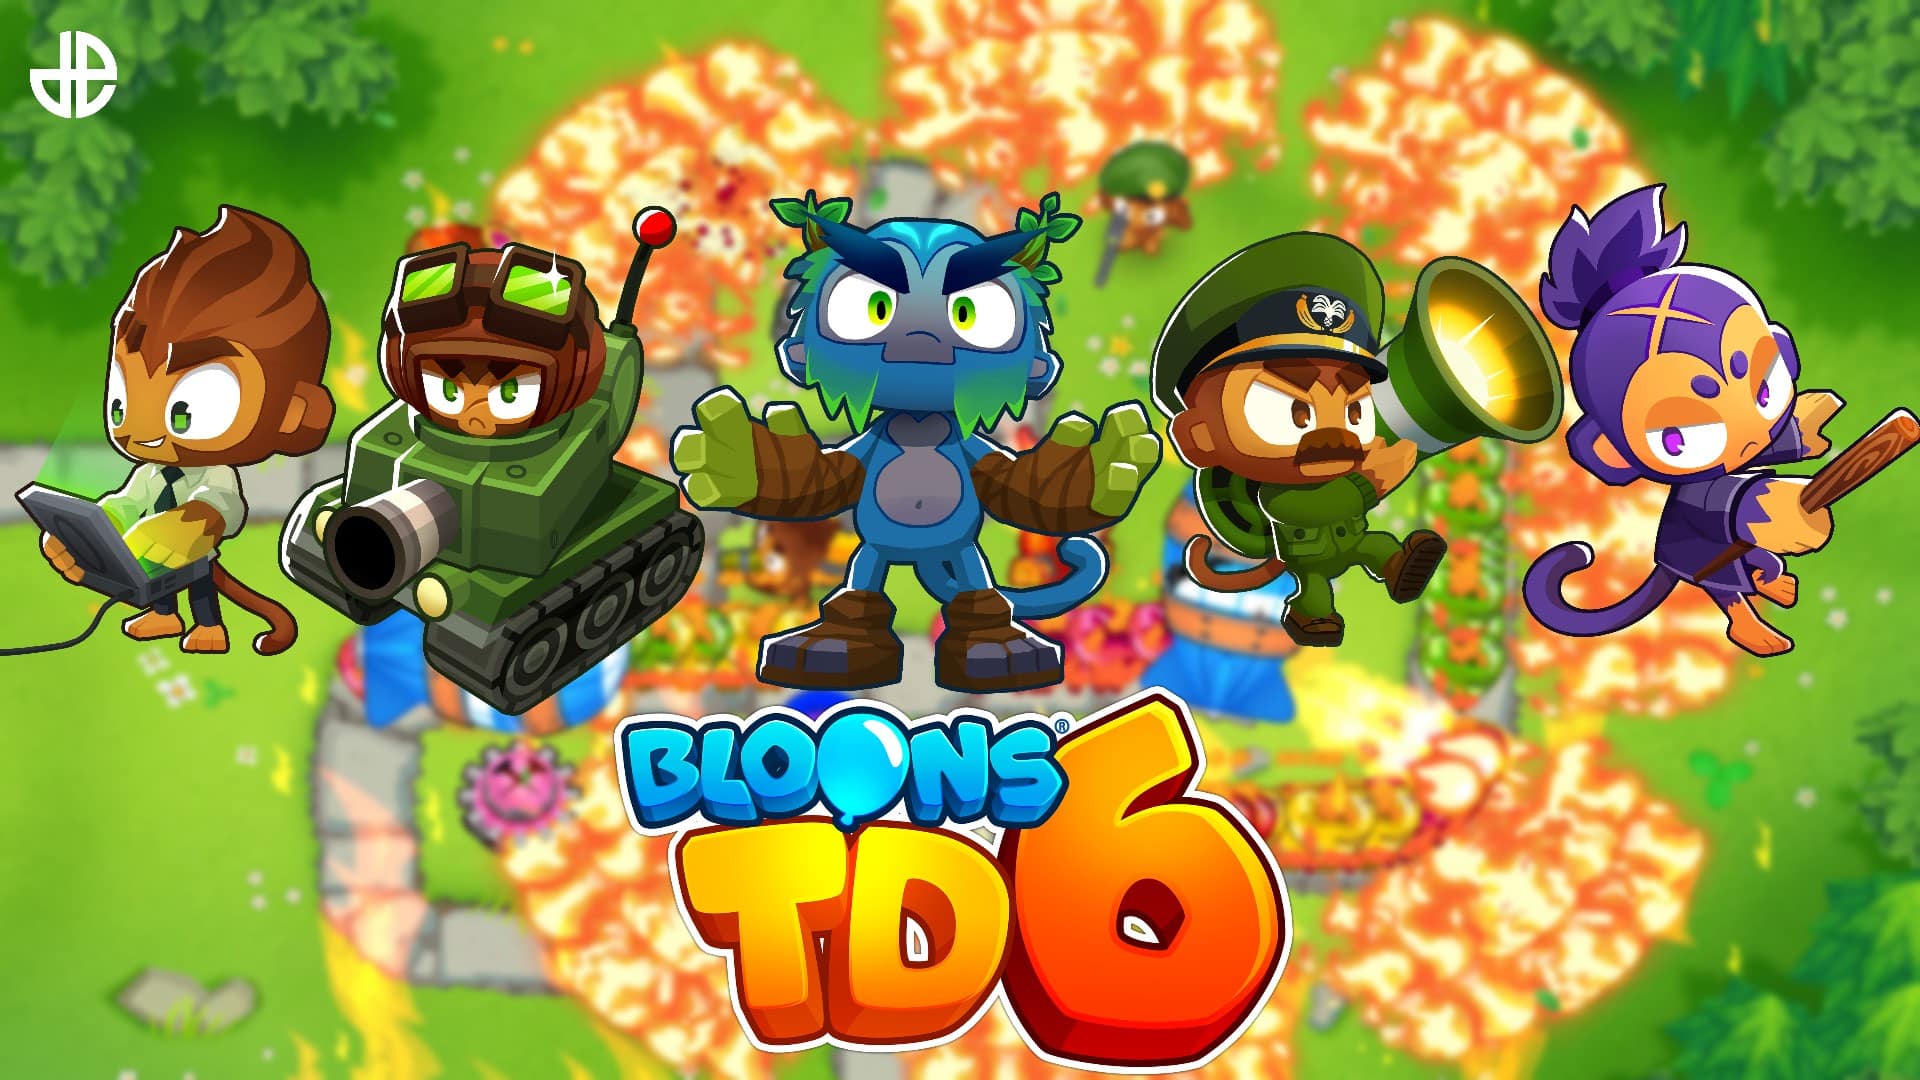 BTD6 wallpaper edit free to use  Bloons Amino